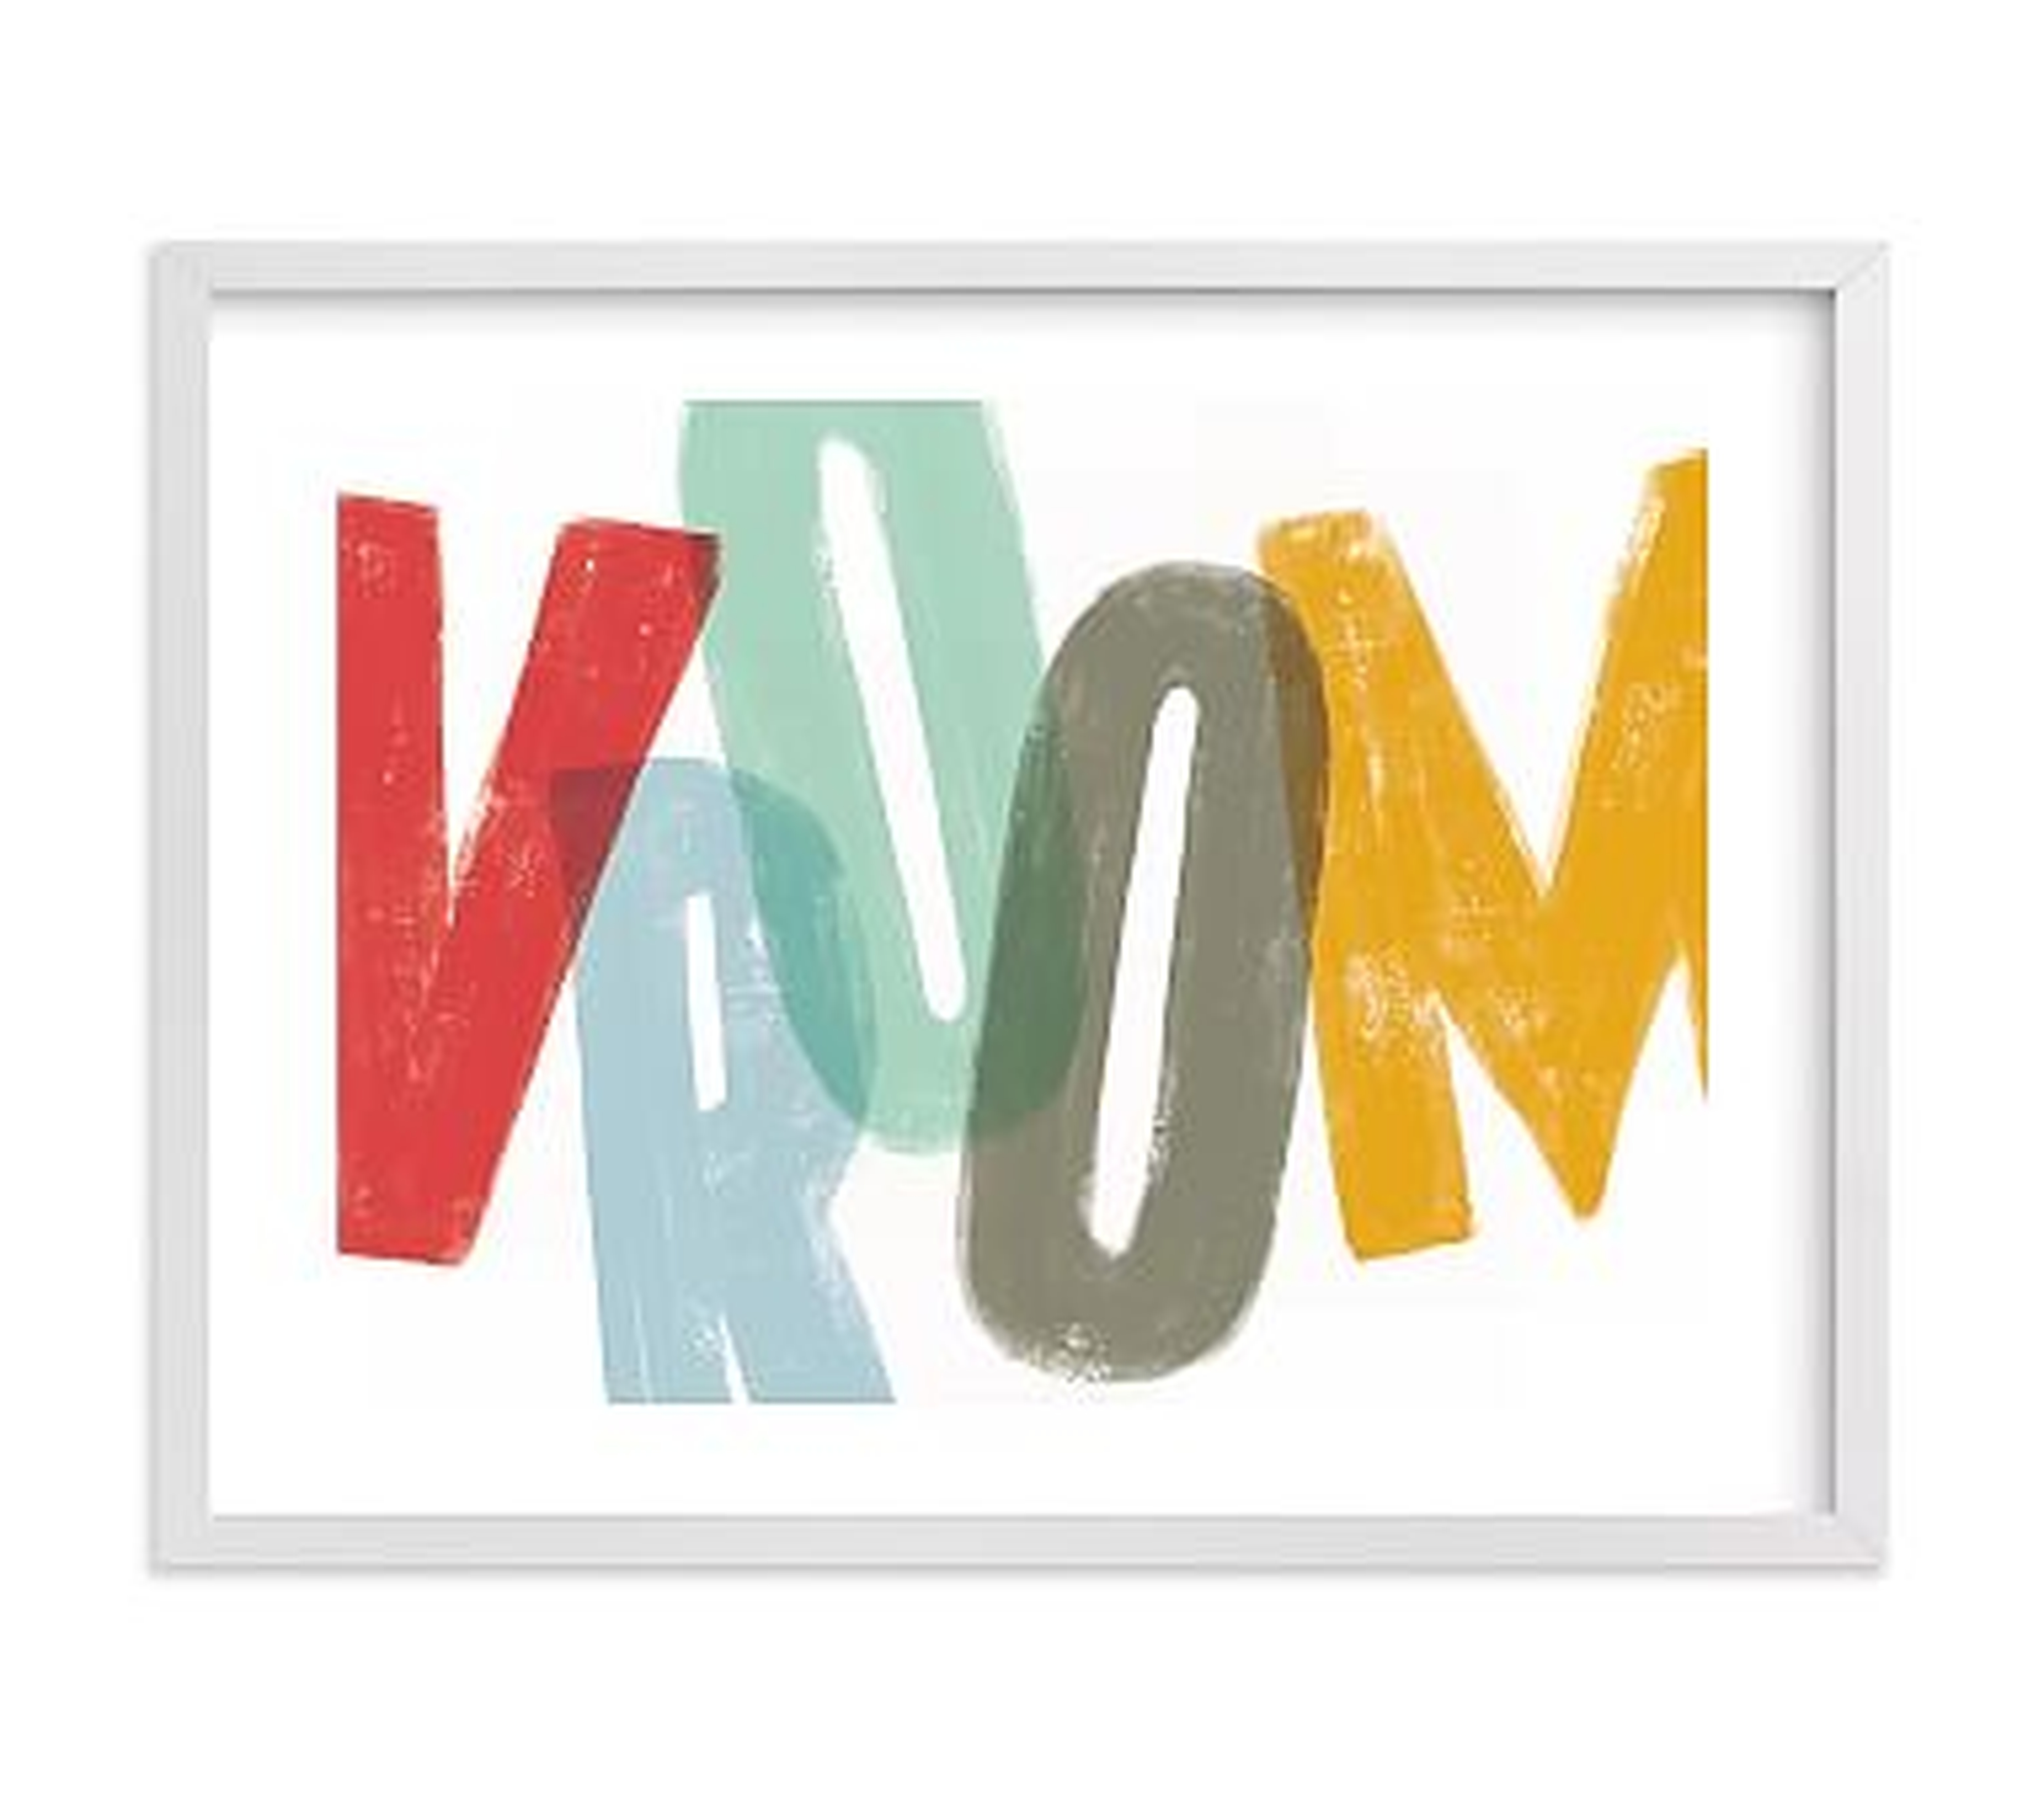 Vroom Wall Art by Minted(R), 24x18, White - Pottery Barn Kids